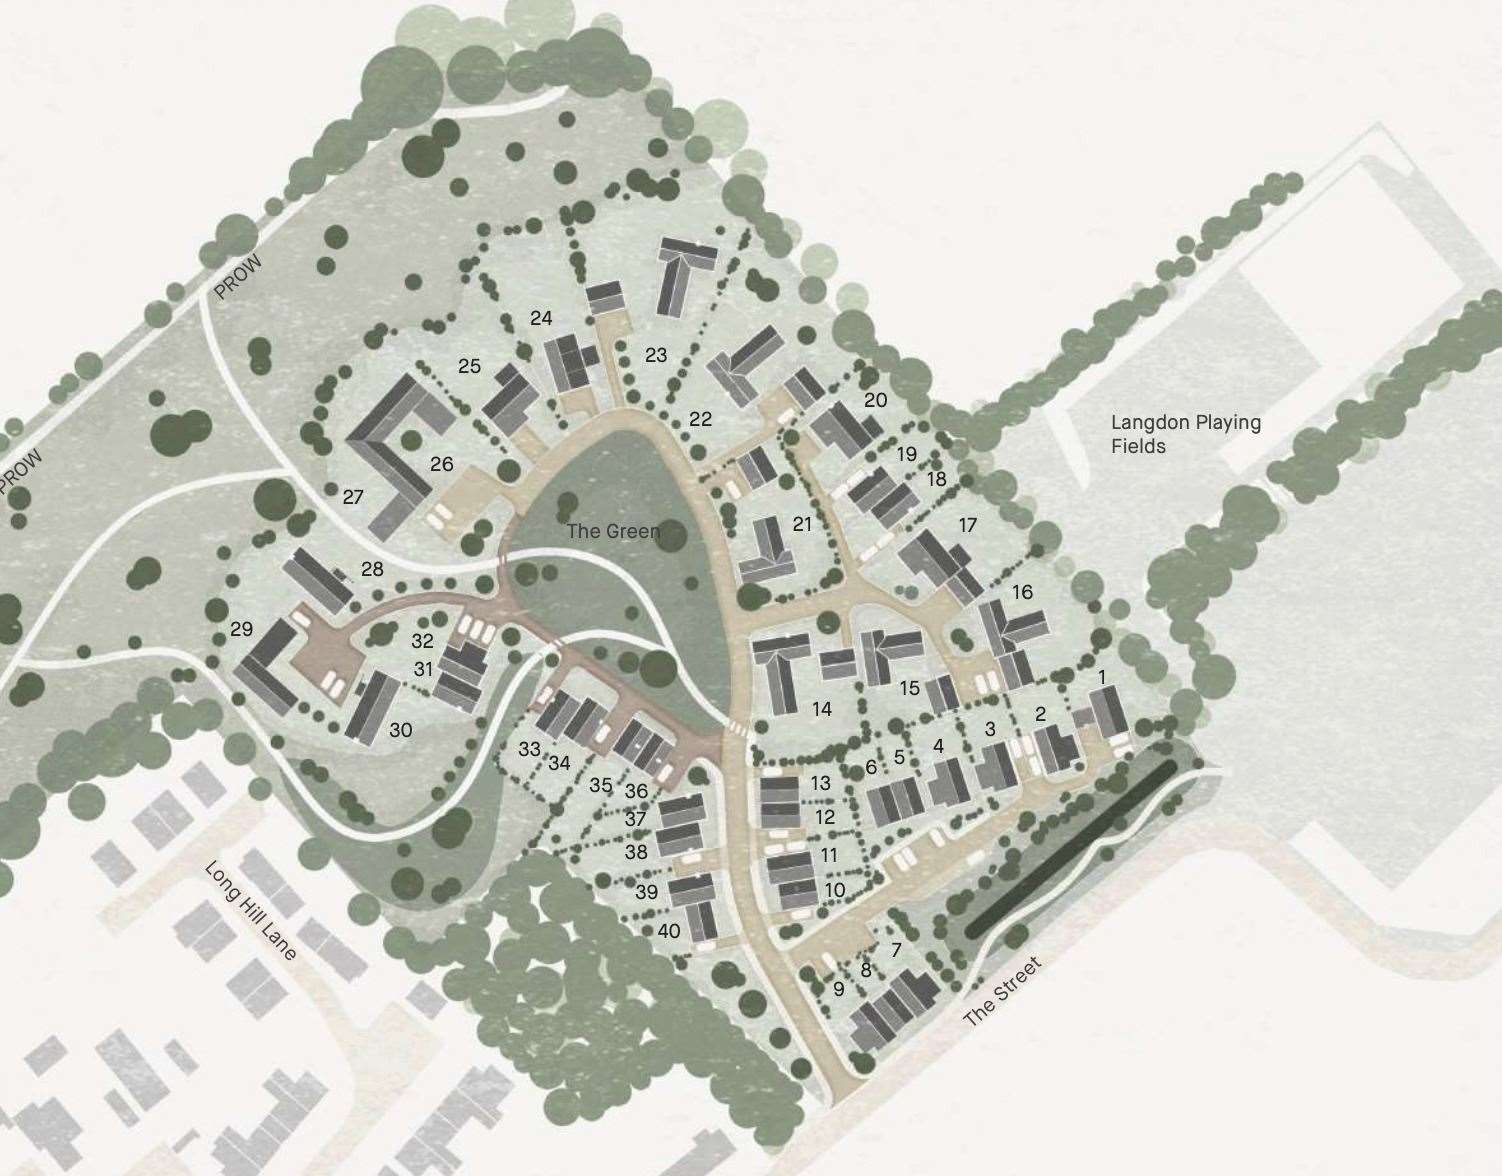 How the new development could look. Picture: Gladman Developments